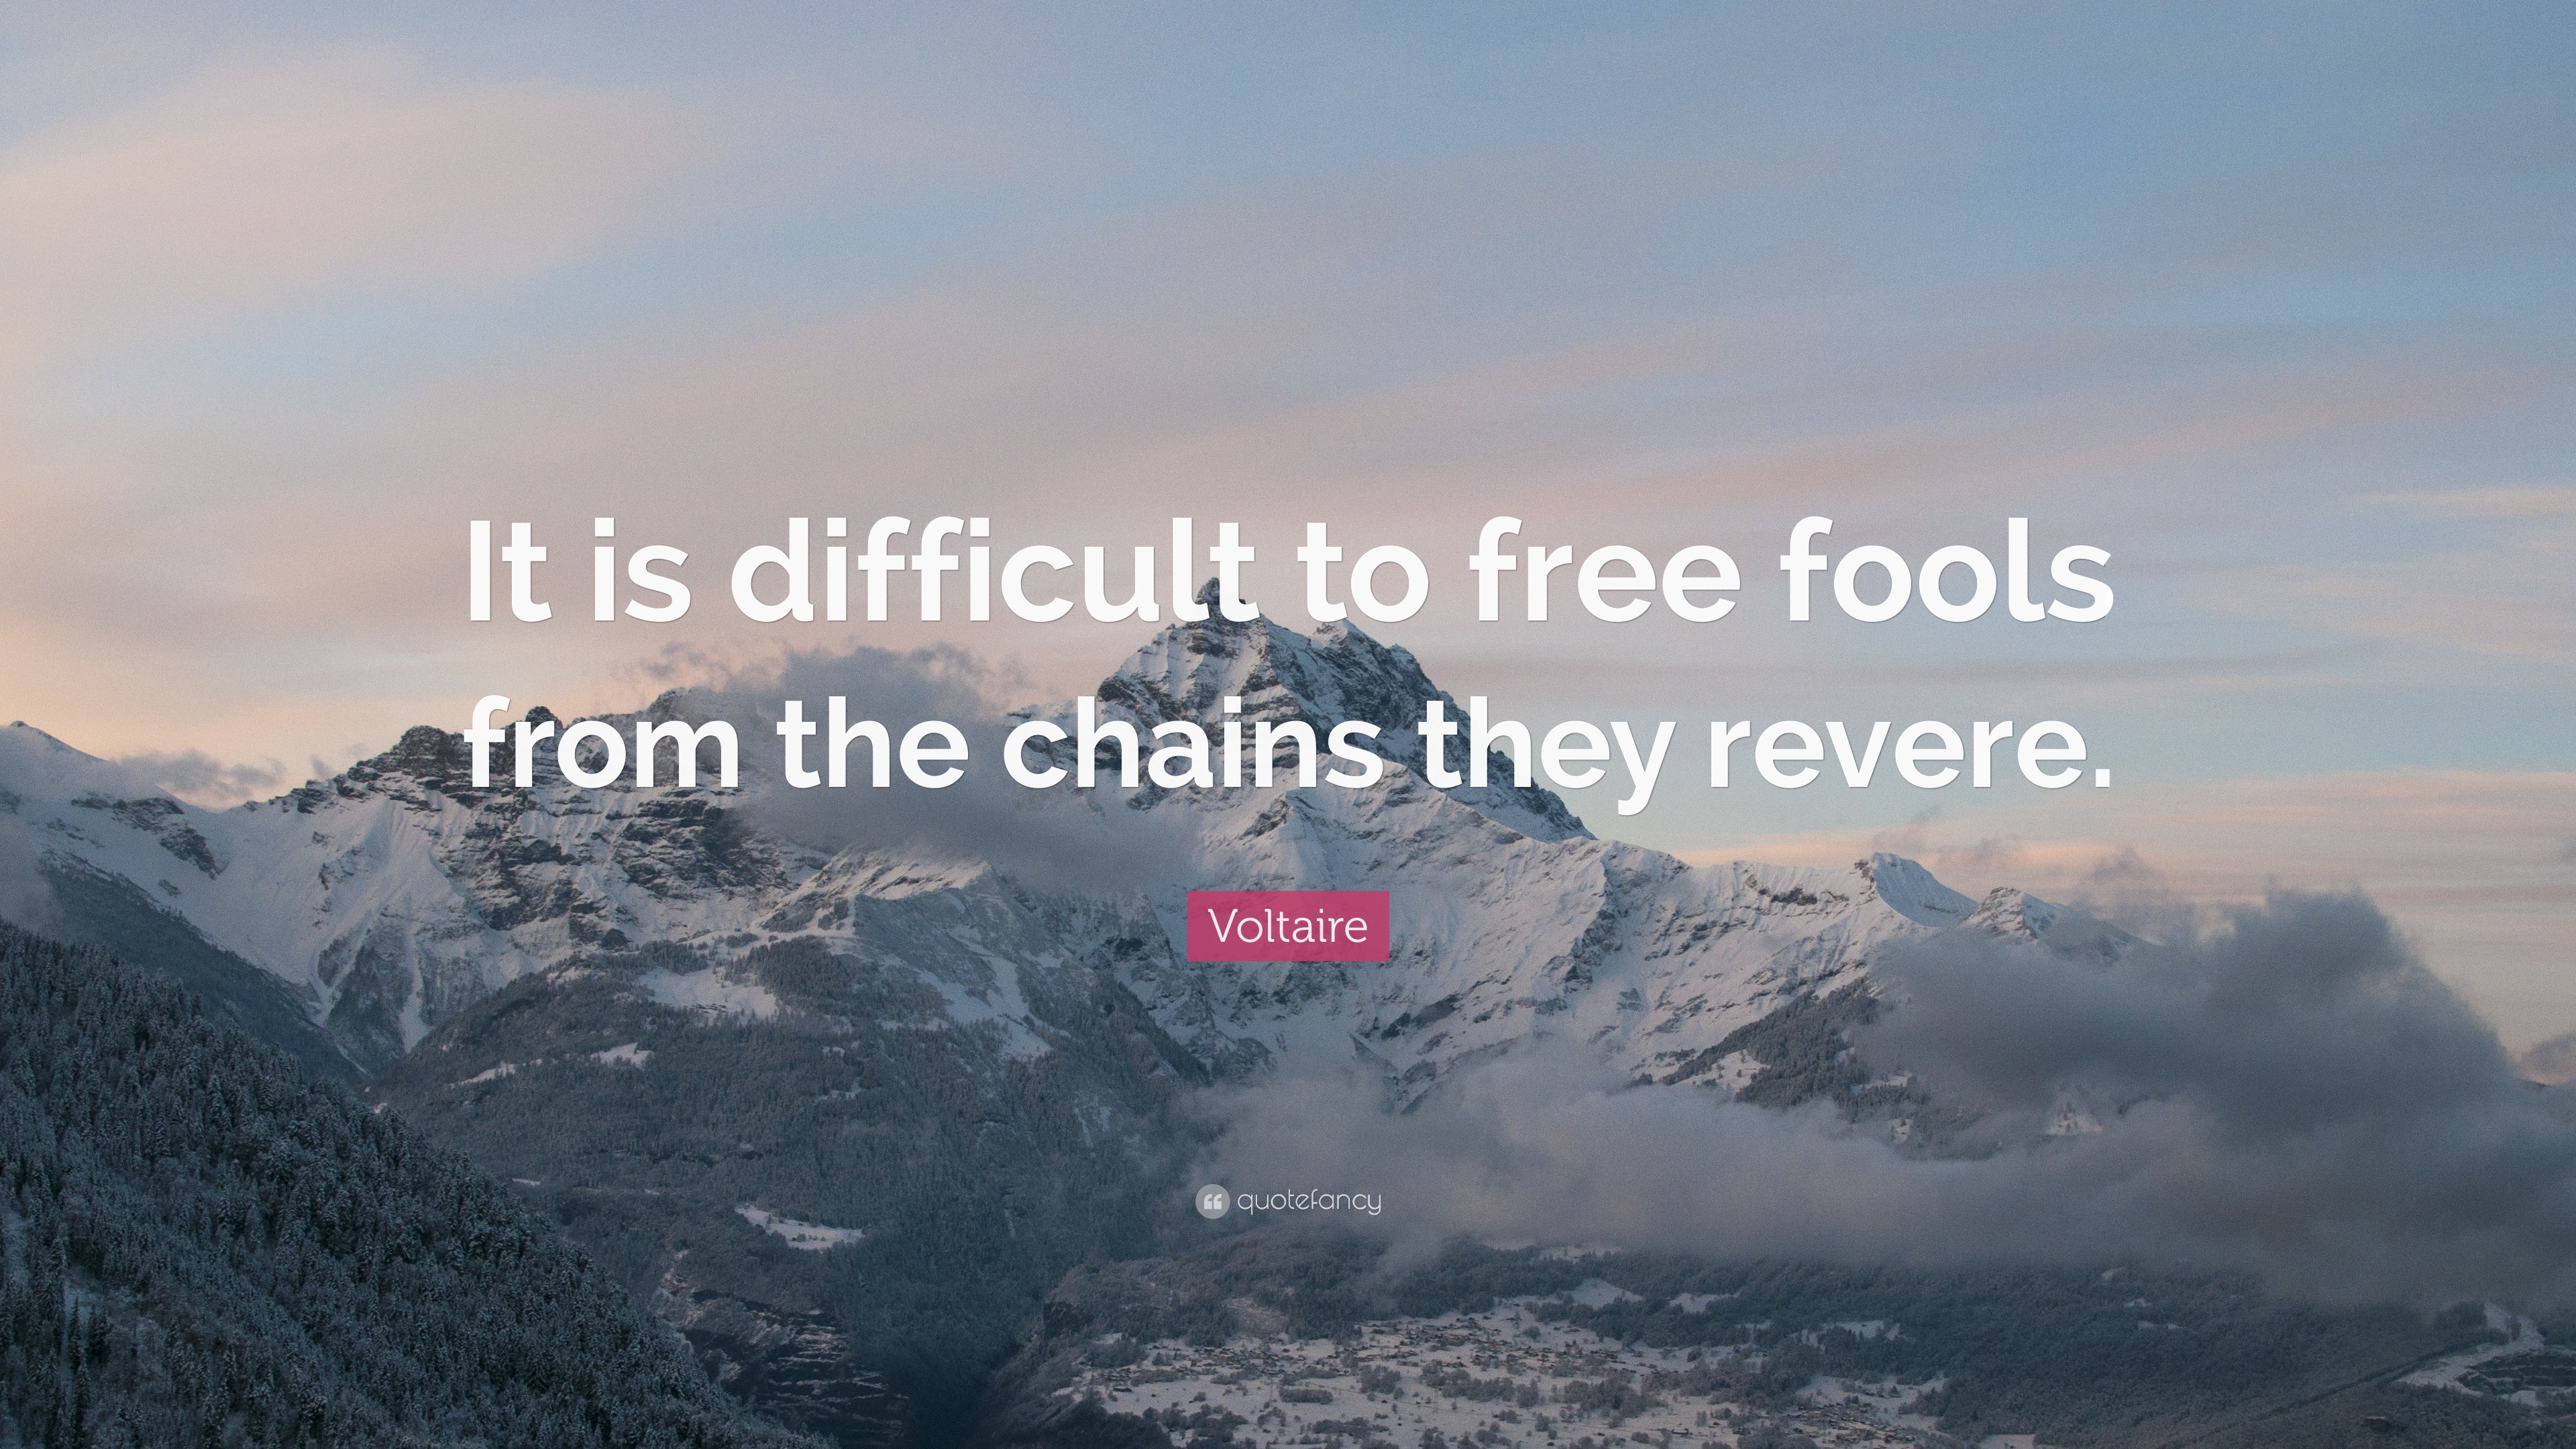 Voltaire Quote: “It is difficult to free fools from the chains they revere.”